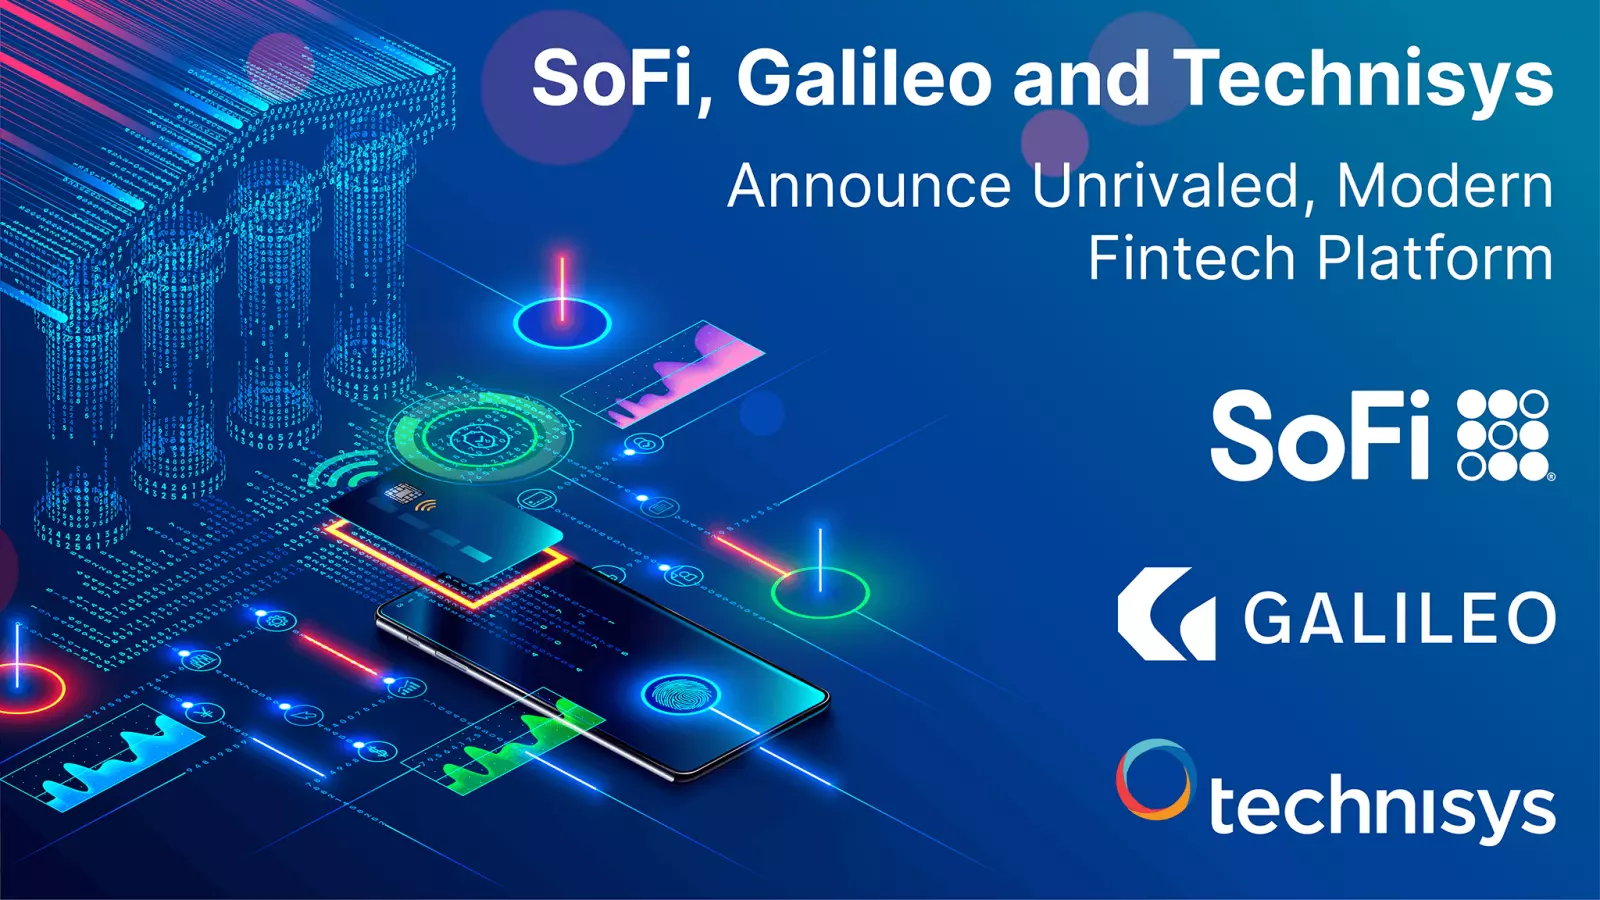 Technisys adds a unique, strategic technology and business to the SoFi family, bolstering SoFi in its pursuit to provide best-of-breed products as a one-stop-shop financial services platform, and complementing and enhancing SoFi’s Galileo business, in SoFi’s overall pursuit to build the AWS of fintech.